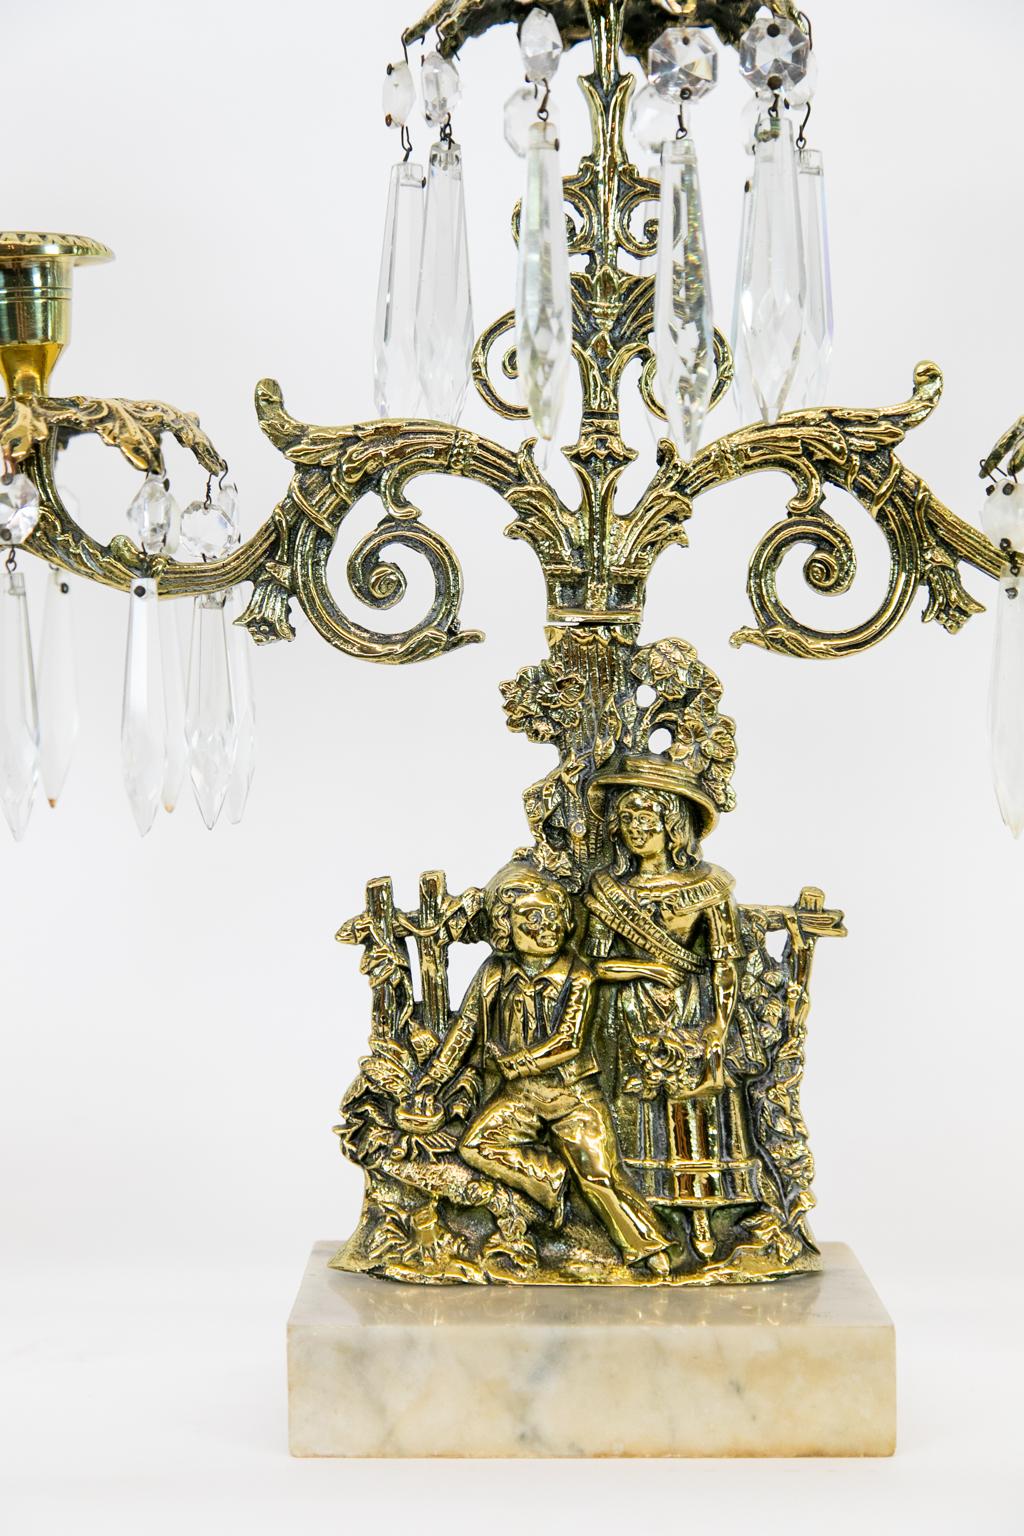 Brass and marble girandoles, each formed with floral arabesques as well as women and child figures on marble bases. The prisms are cut glass. The middle girandole is 15” wide, they are 5.5” wide at the base.